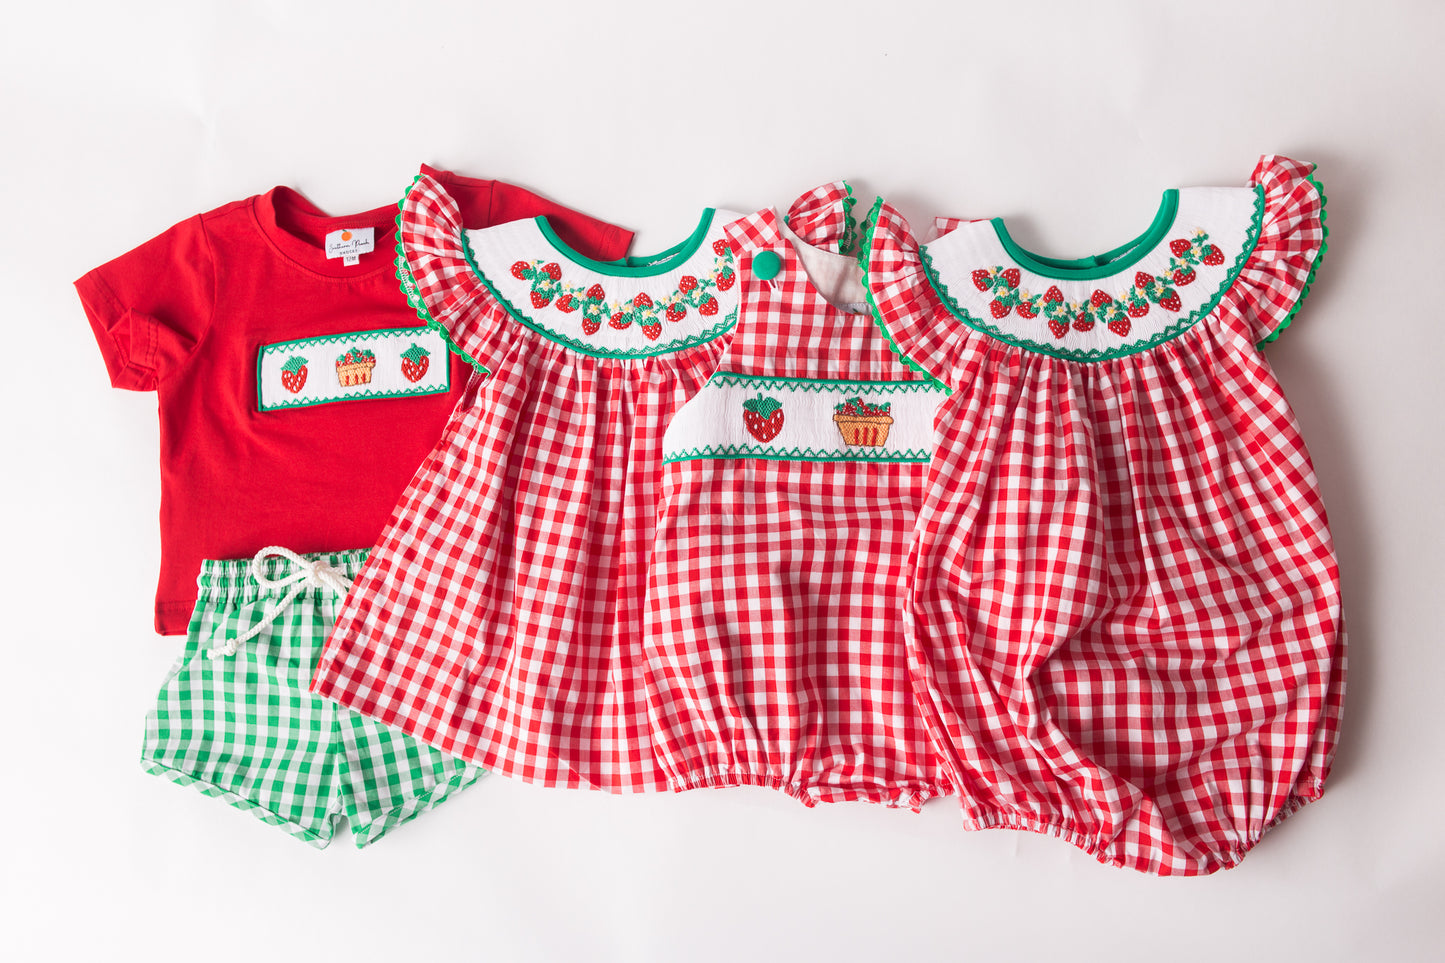 Smocked Strawberries Girl outfit